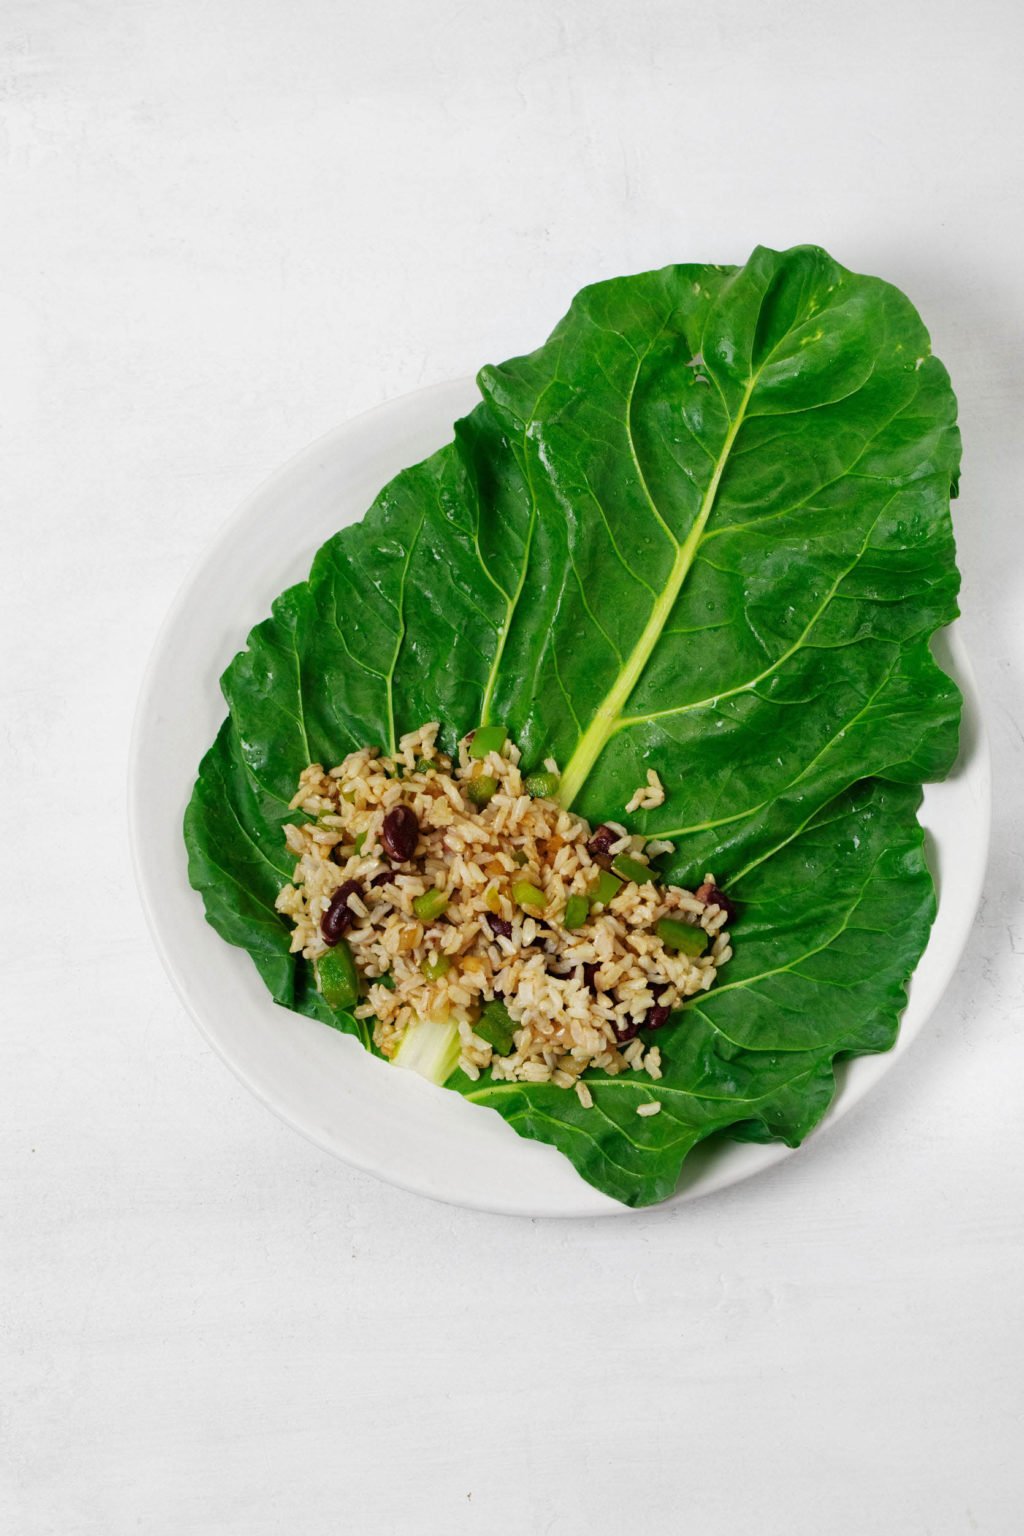 A large, steamed collard green leaf has been filled with rice, beans, and vegetables.